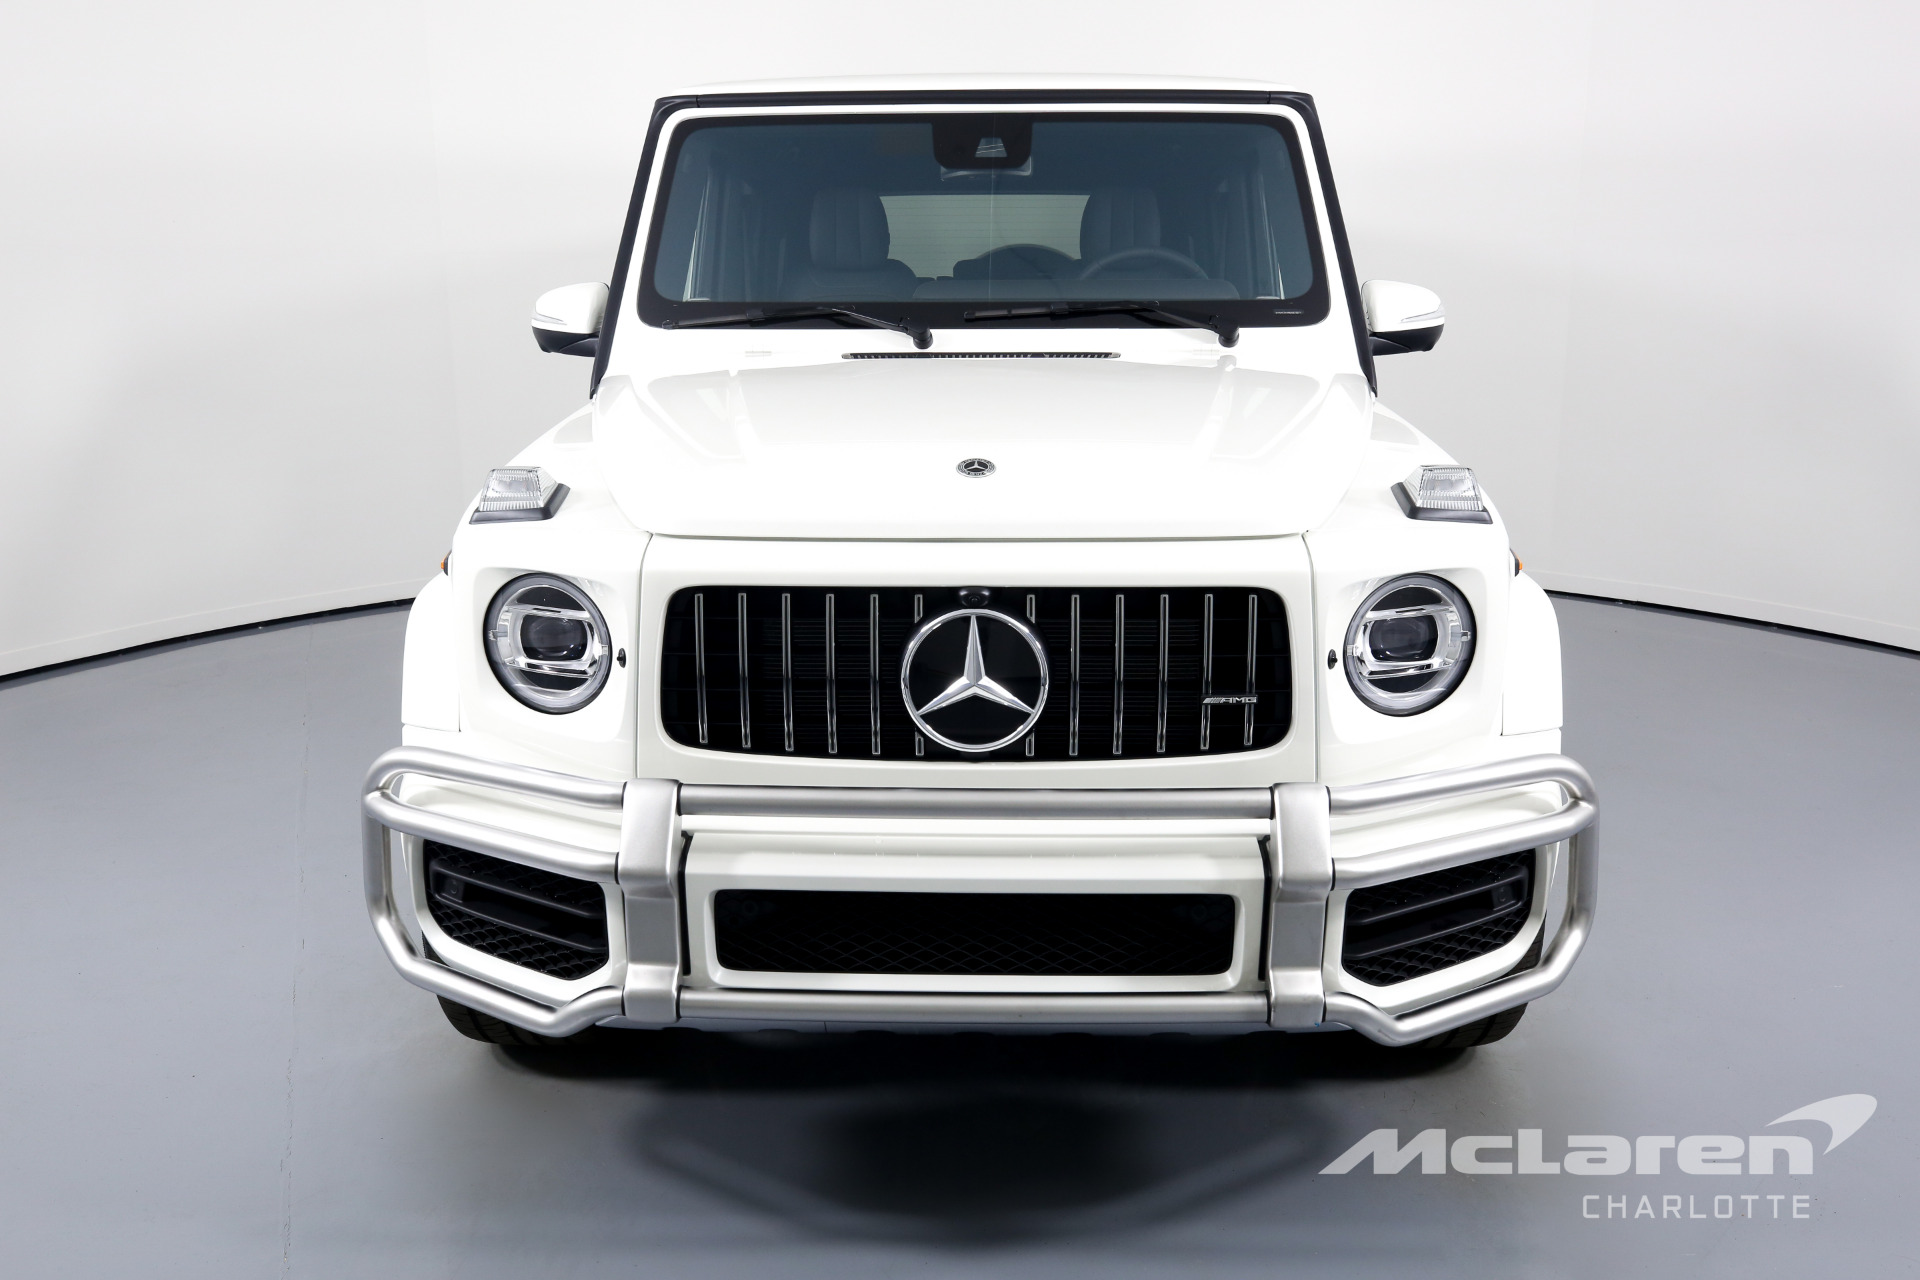 Used 21 Mercedes Benz G Class Amg G 63 For Sale 279 996 Mclaren Charlotte Stock 3771